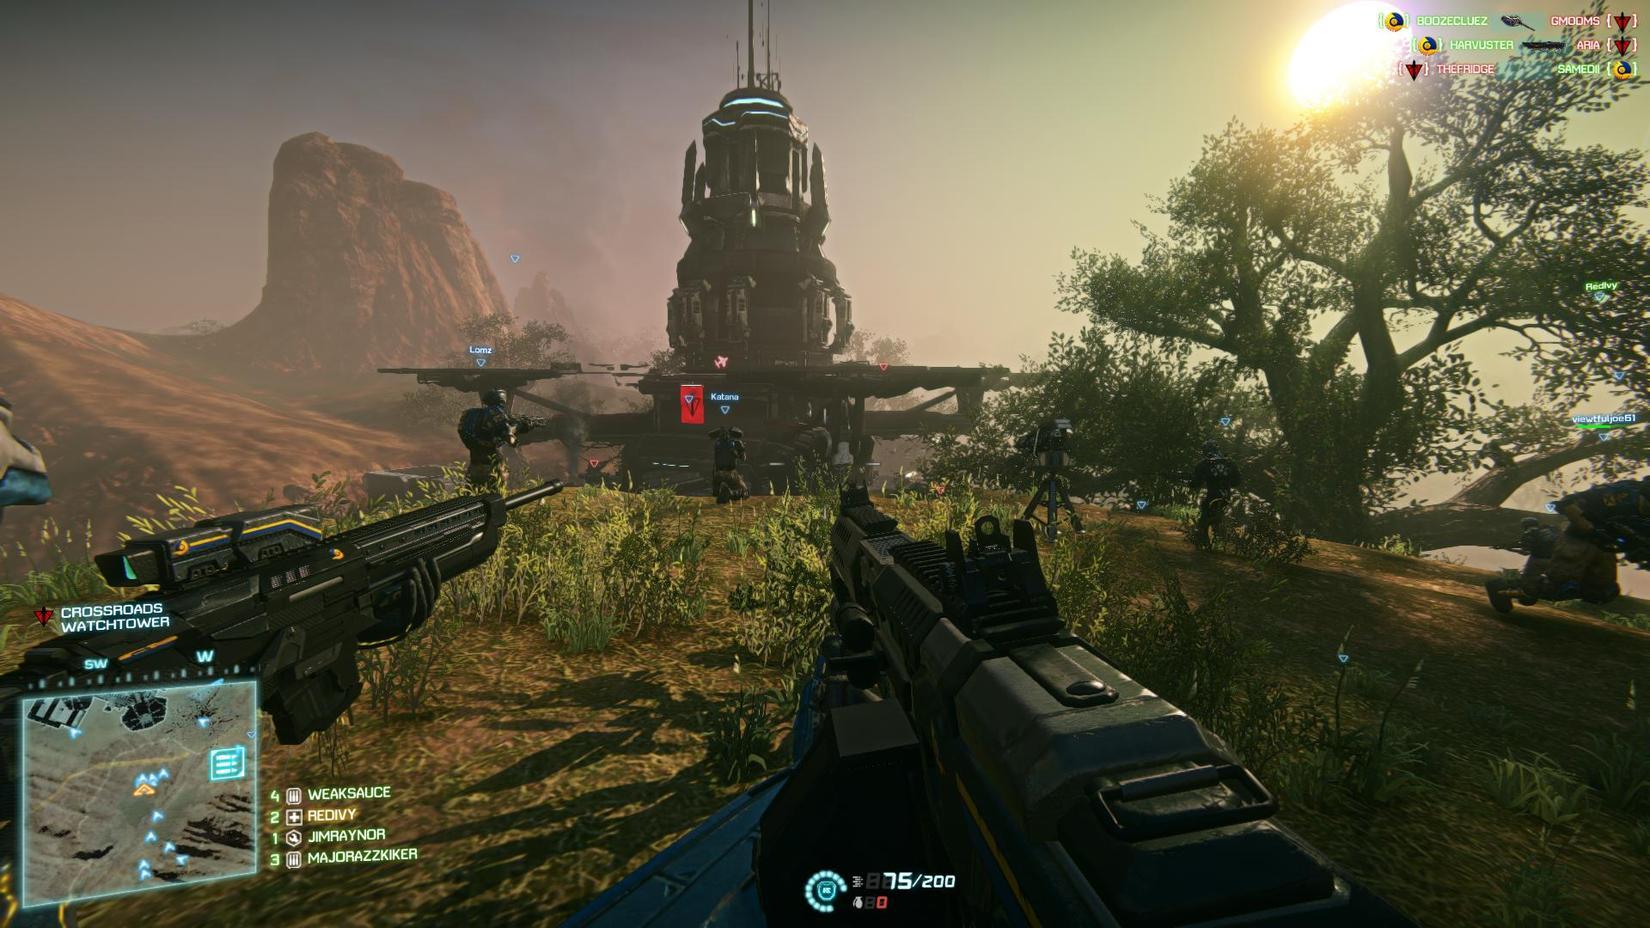 S S News Planetside 2 On Ps4 Is Basically Pc Version On Max Settings Paperblog